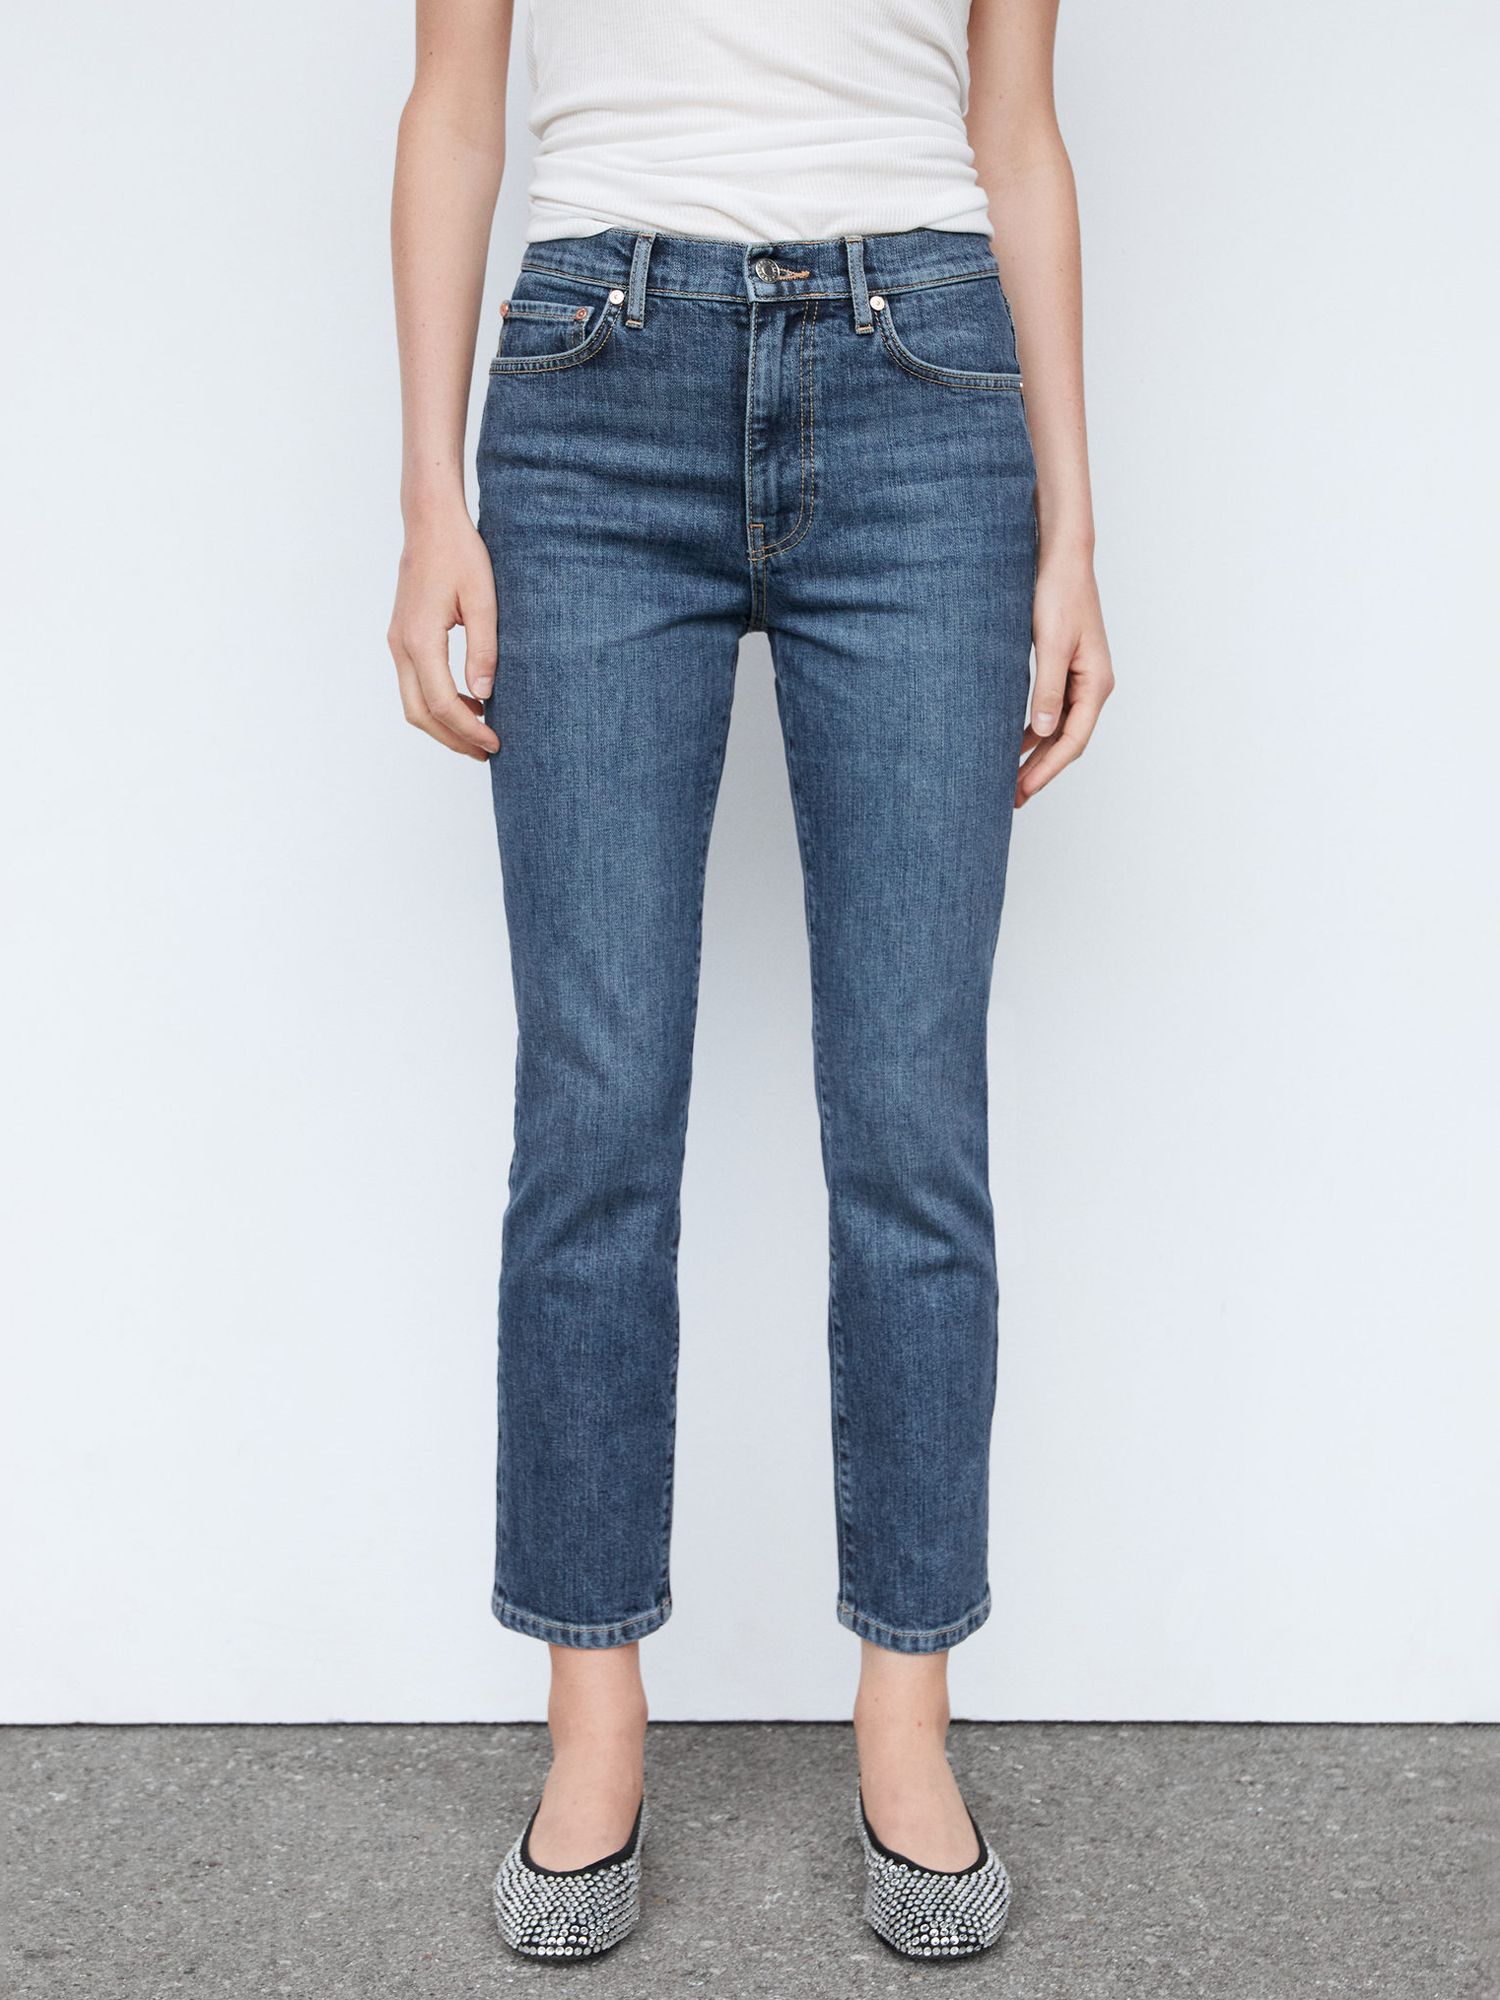 Mango Claudia Slim Cropped Jeans, Open Blue at John Lewis & Partners